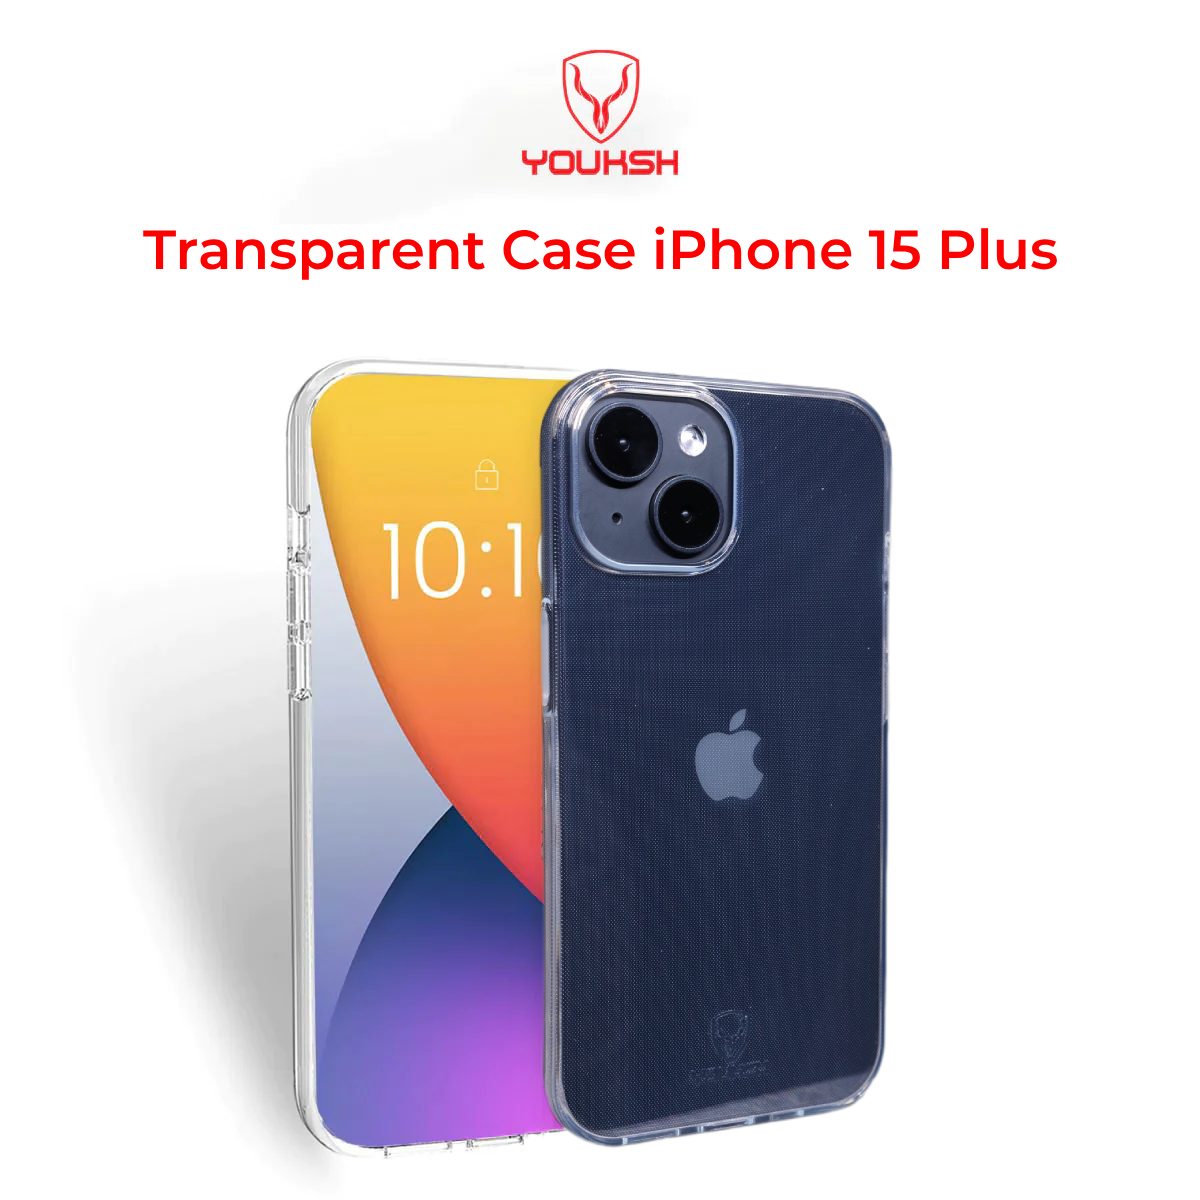 YOUKSH Apple iPhone 15 Plus Transparent Case | Soft Shock Proof Jelly Cover